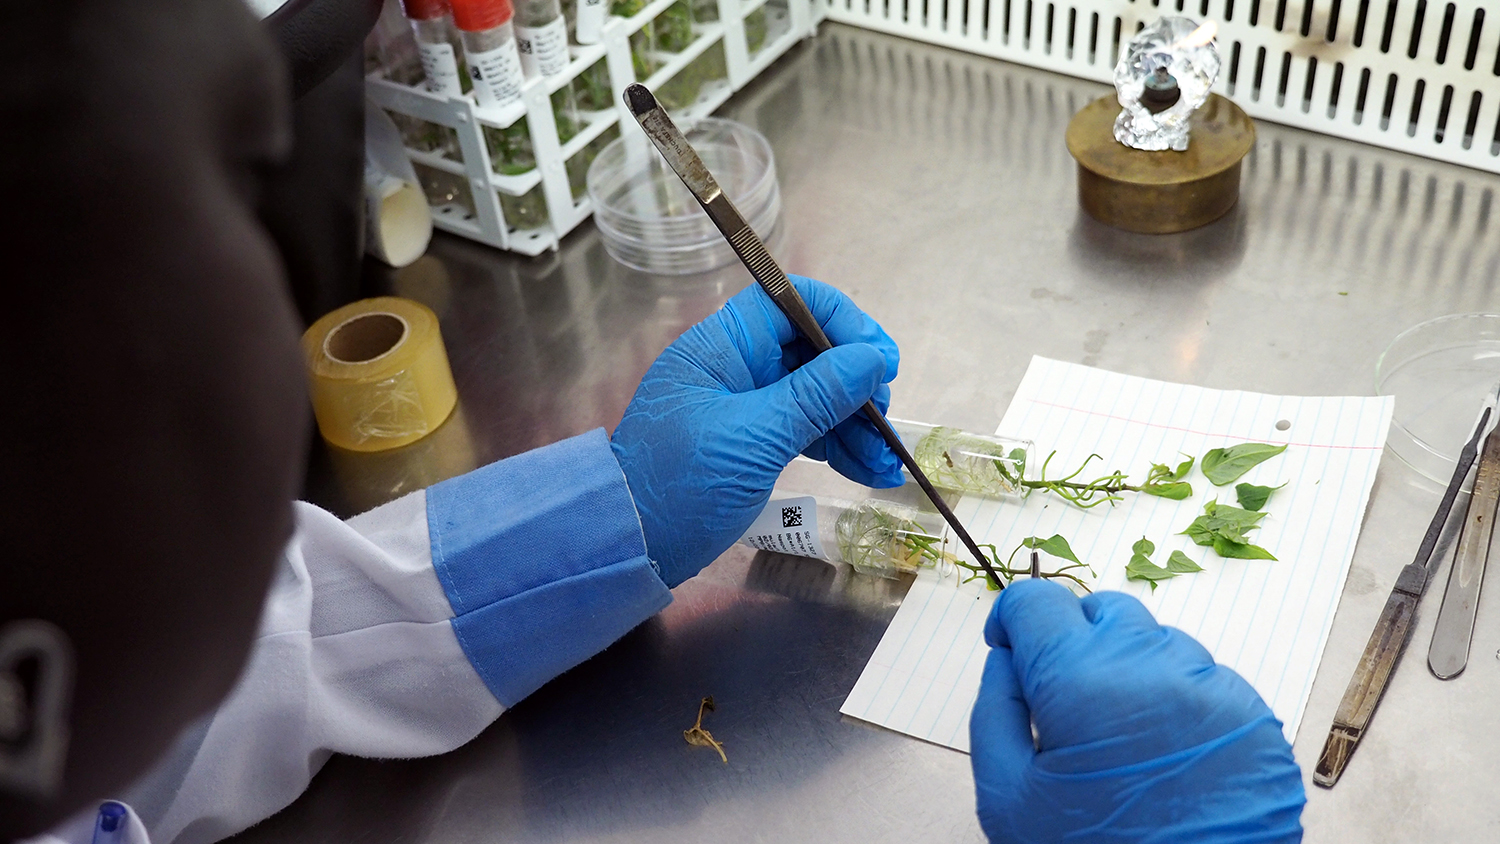 Researcher works on plant samples in lab